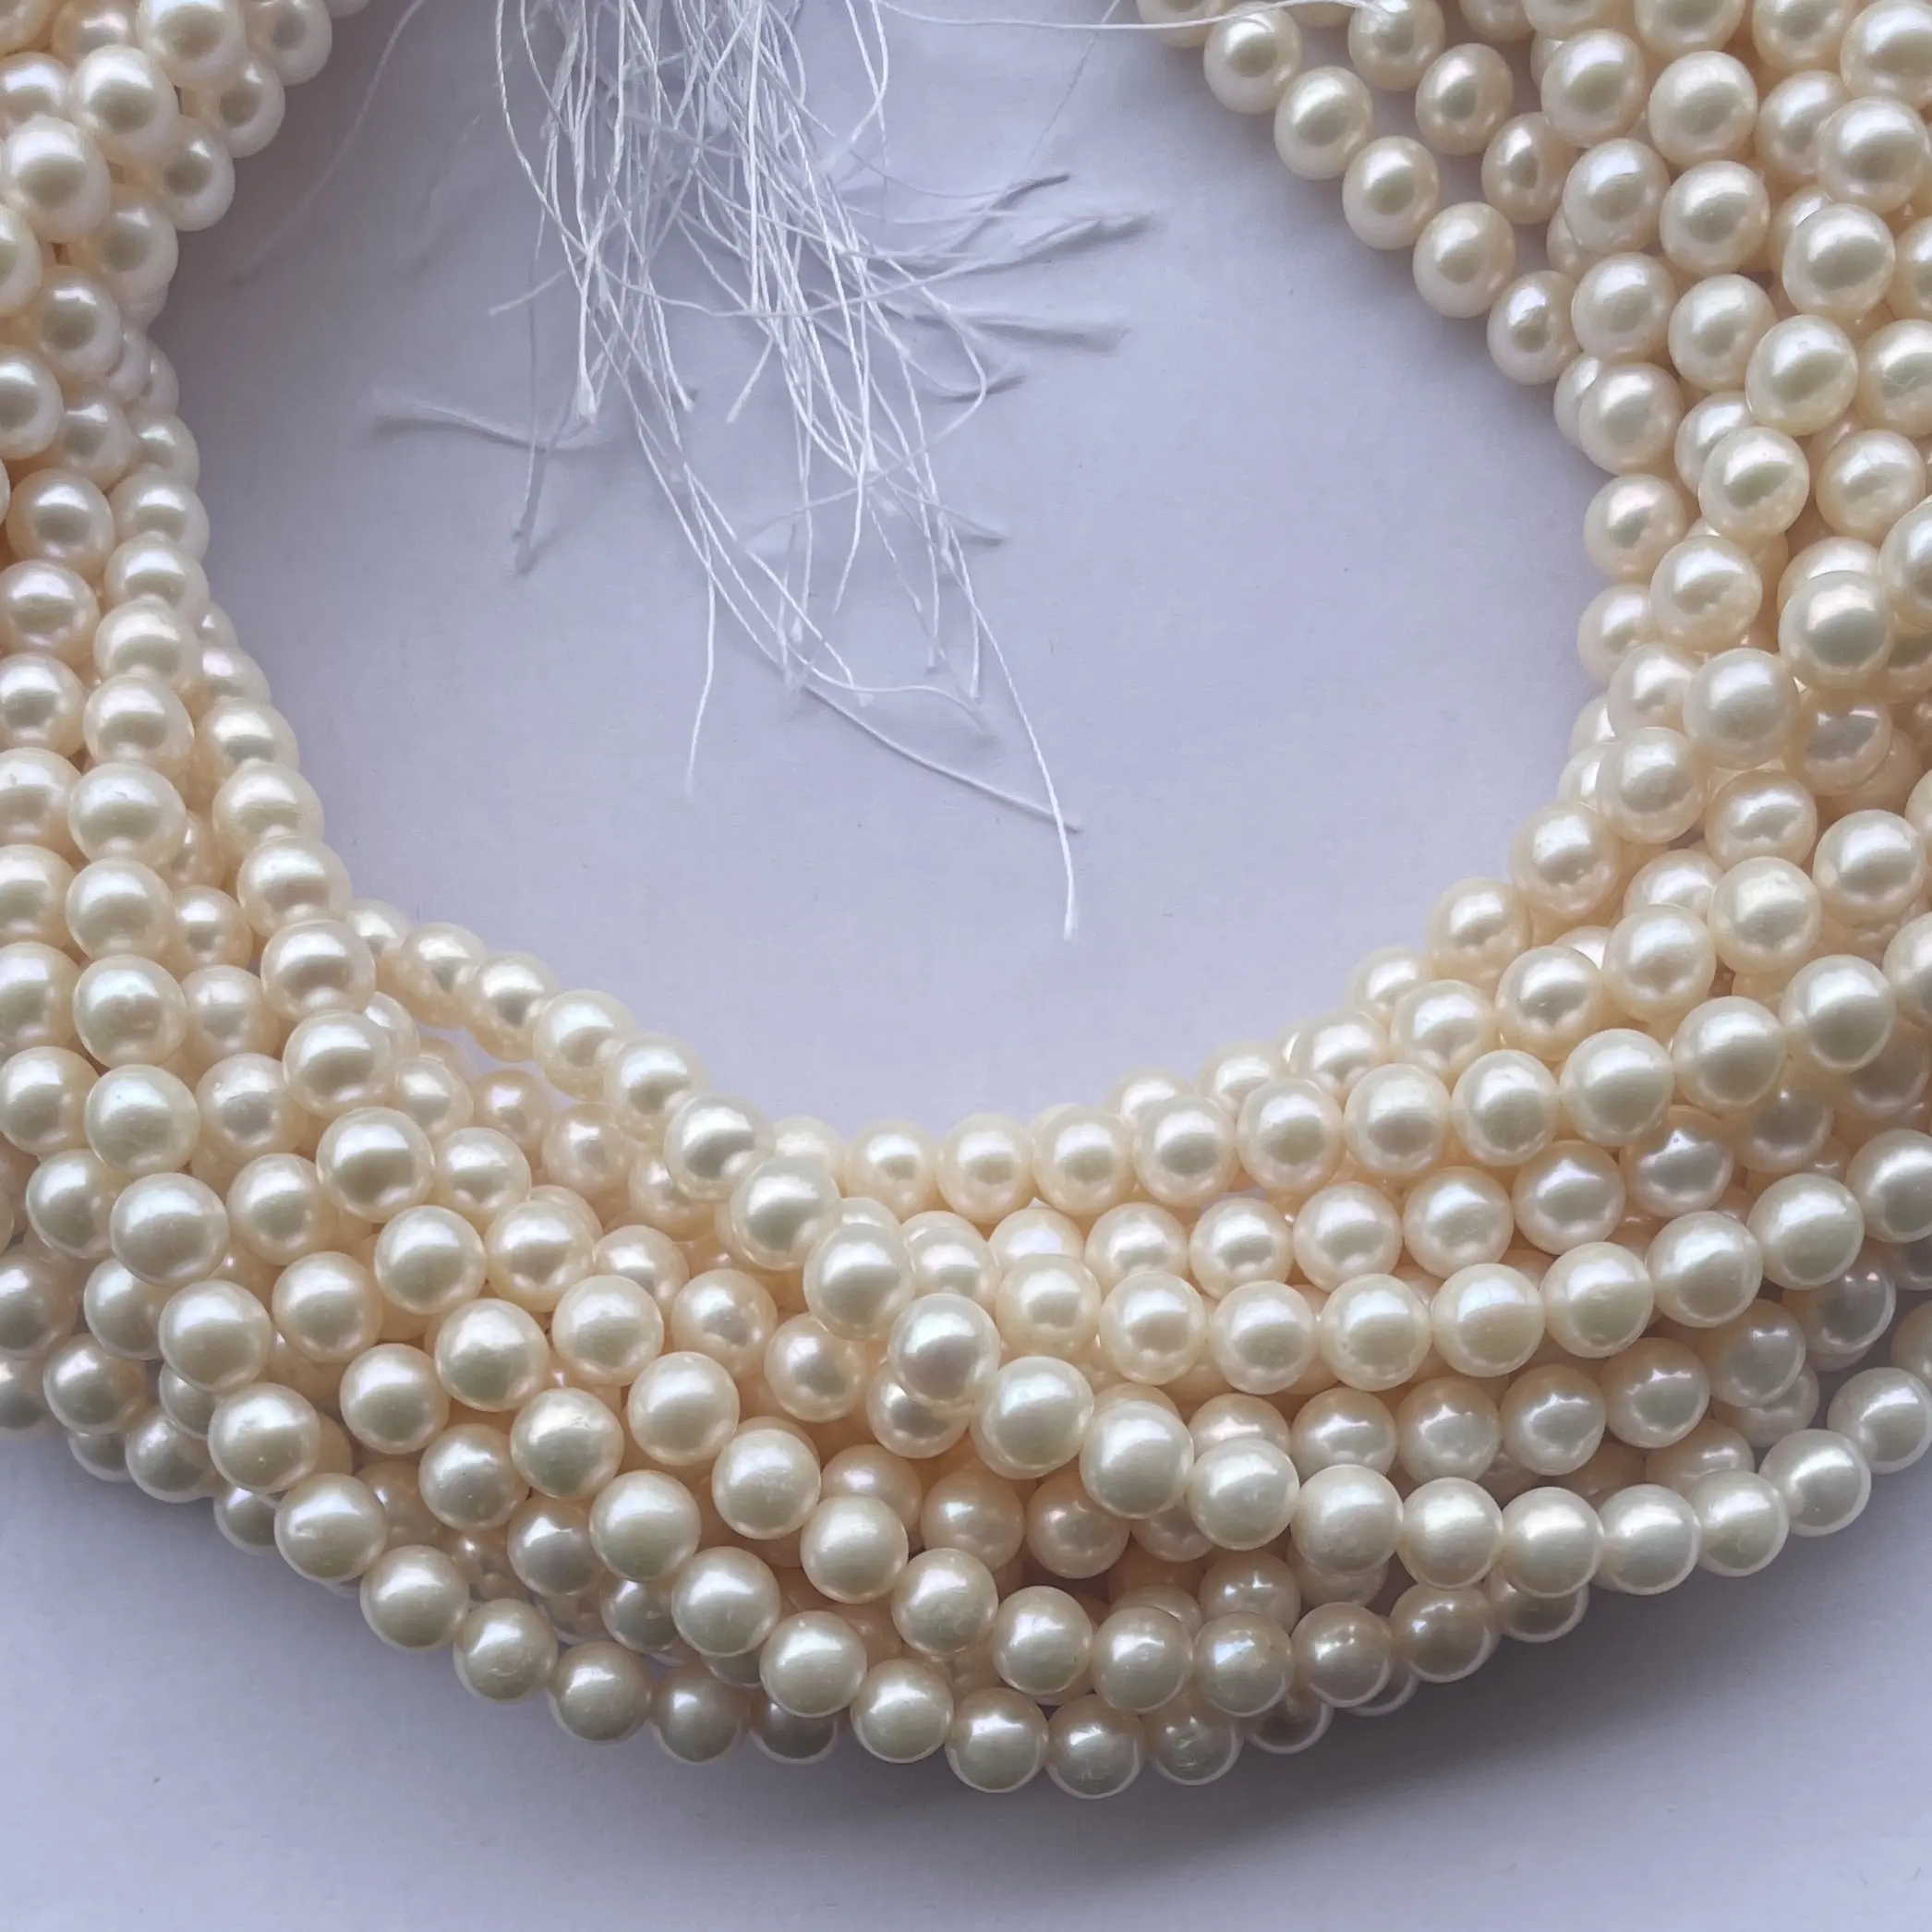 7mm 8mm Natural White Color Freshwater Pearl Stone Round Beads Strand from Wholesale Stone Supplier Cultured Pearls Factory